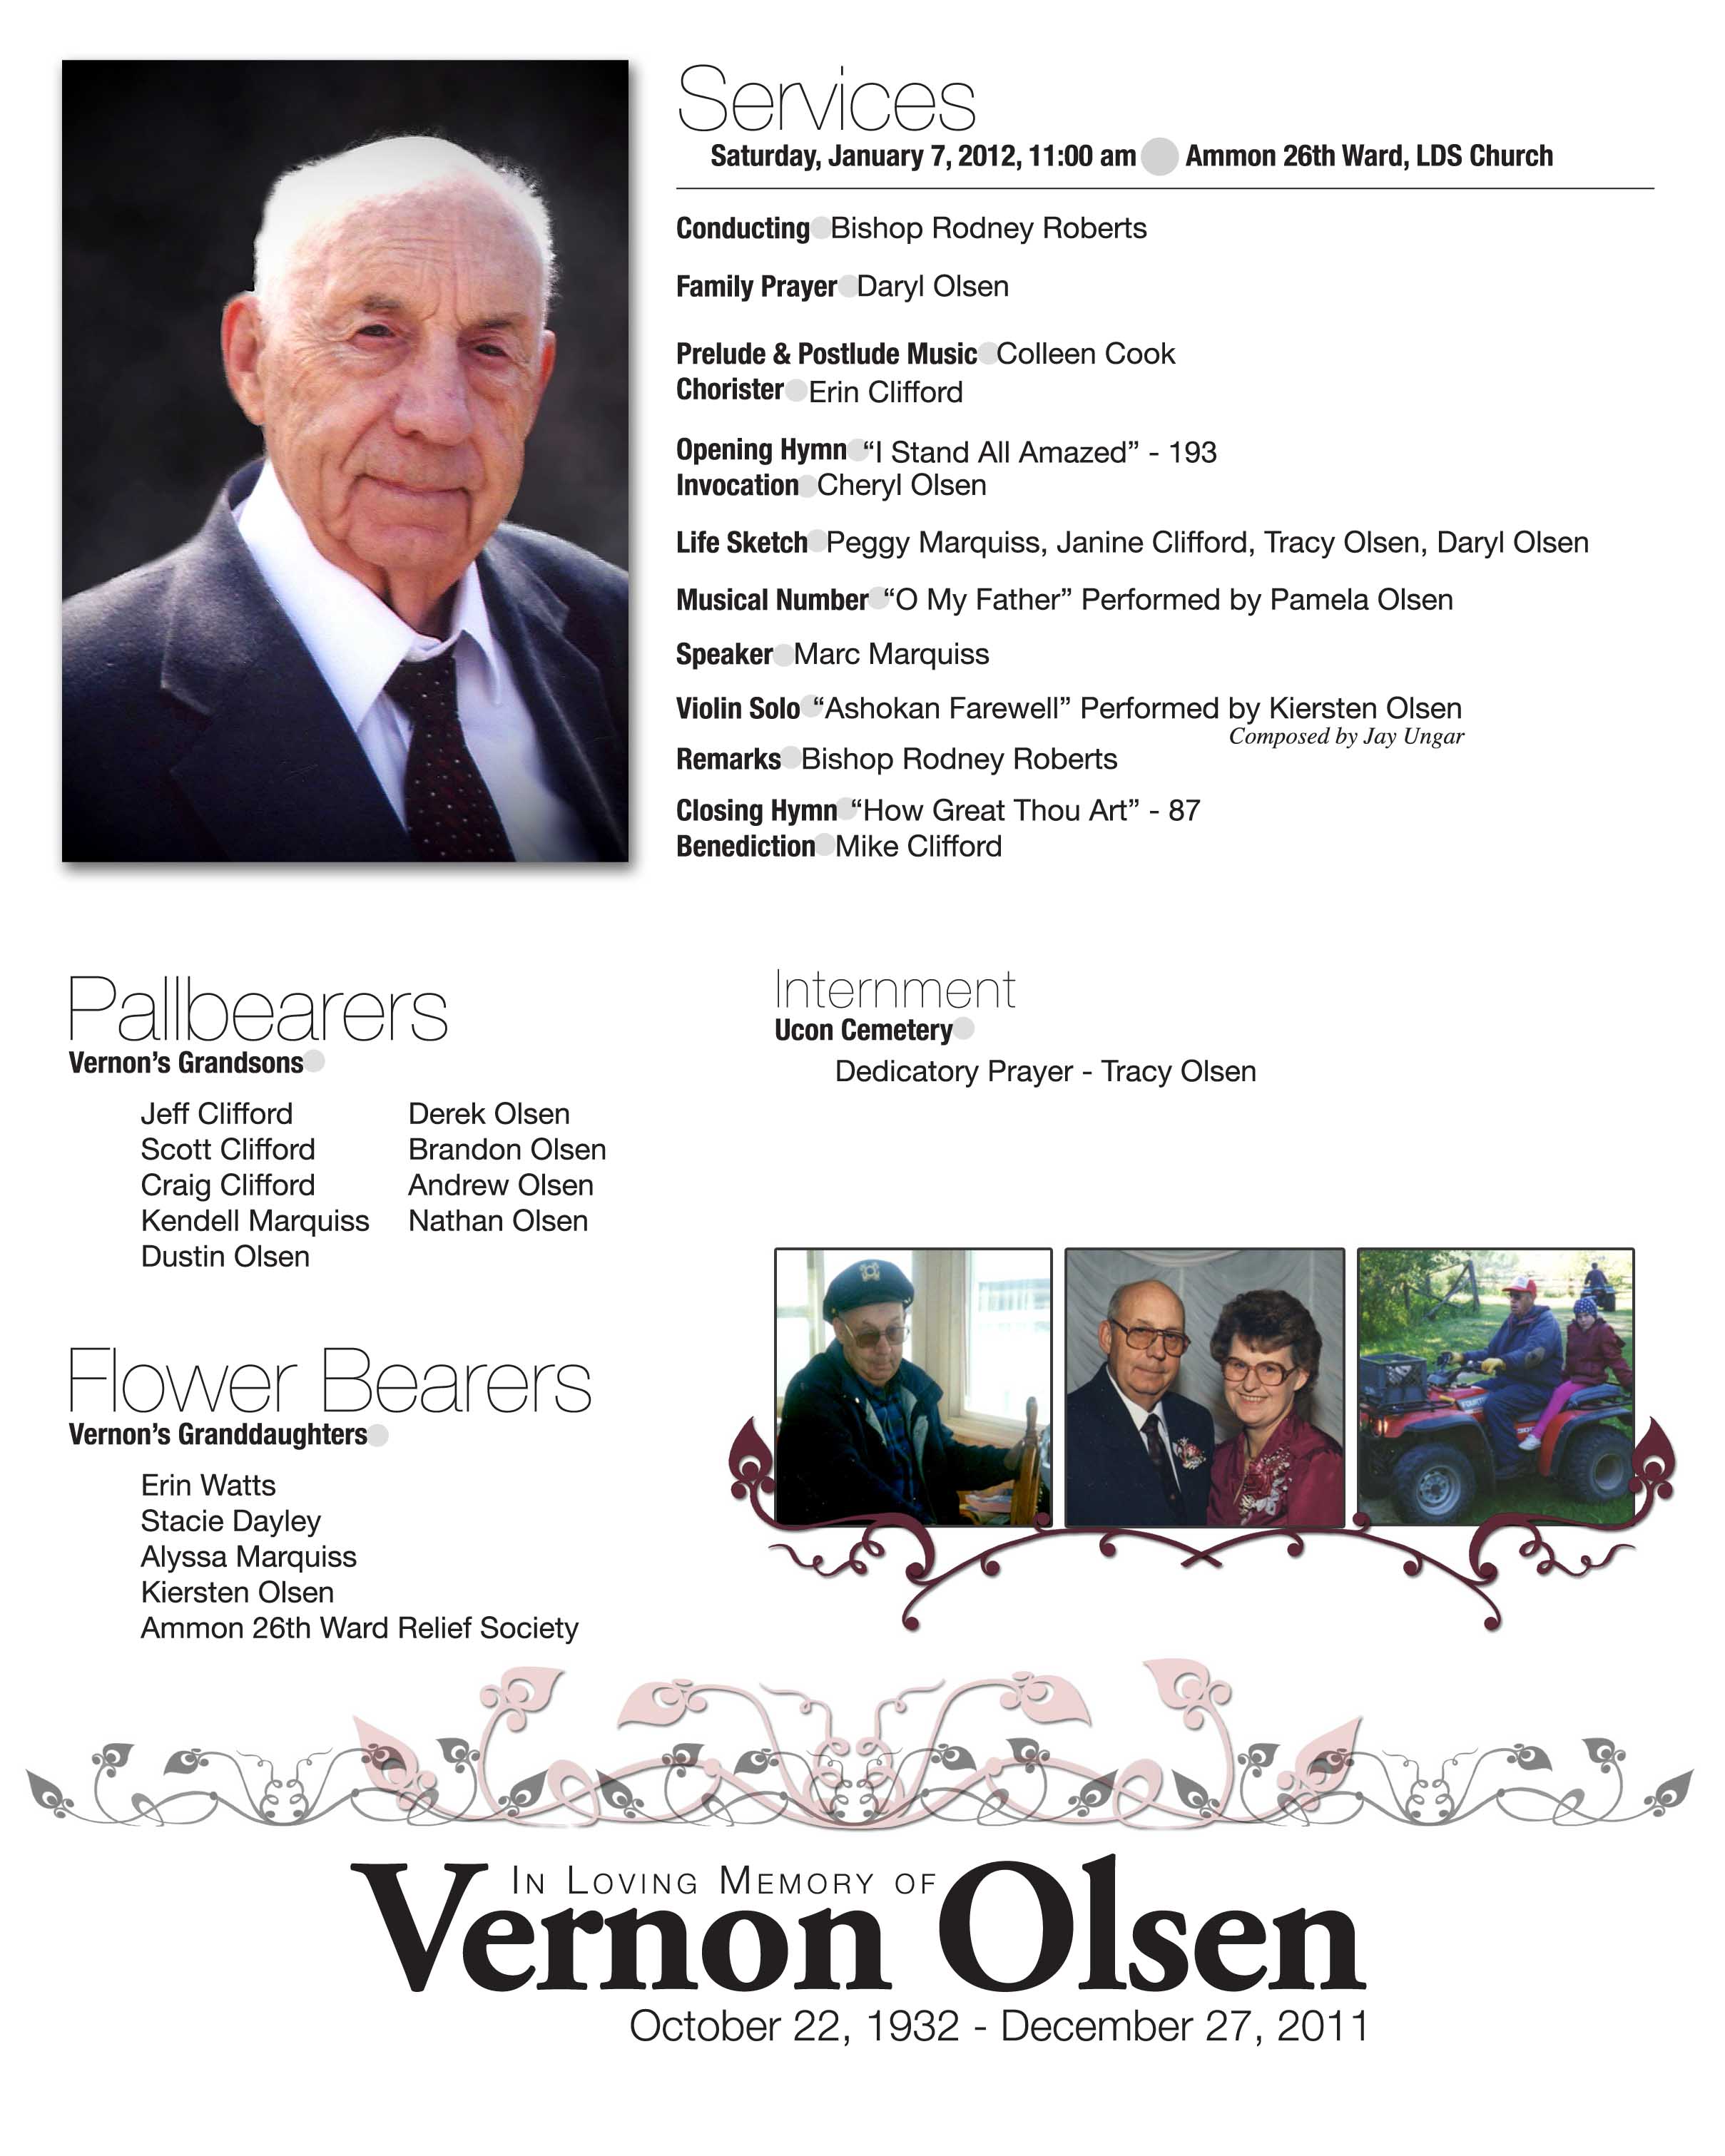 In Memory of Vernon Olsen: A Tribute to my Grandfather